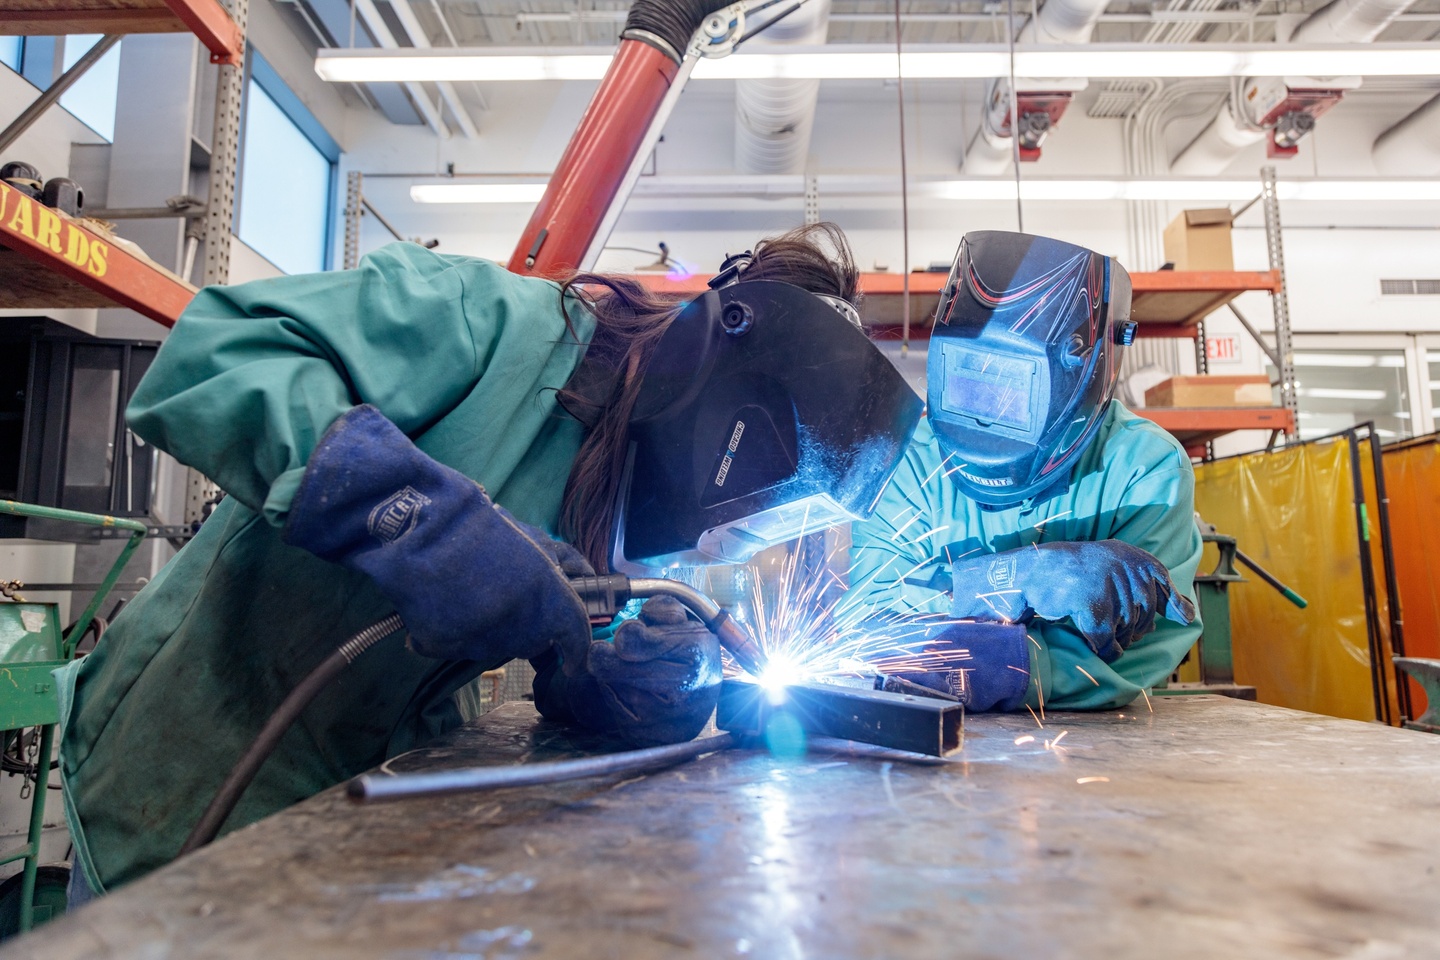 Two people in protective gear use a welder at a table in a high-ceilinged shop space.